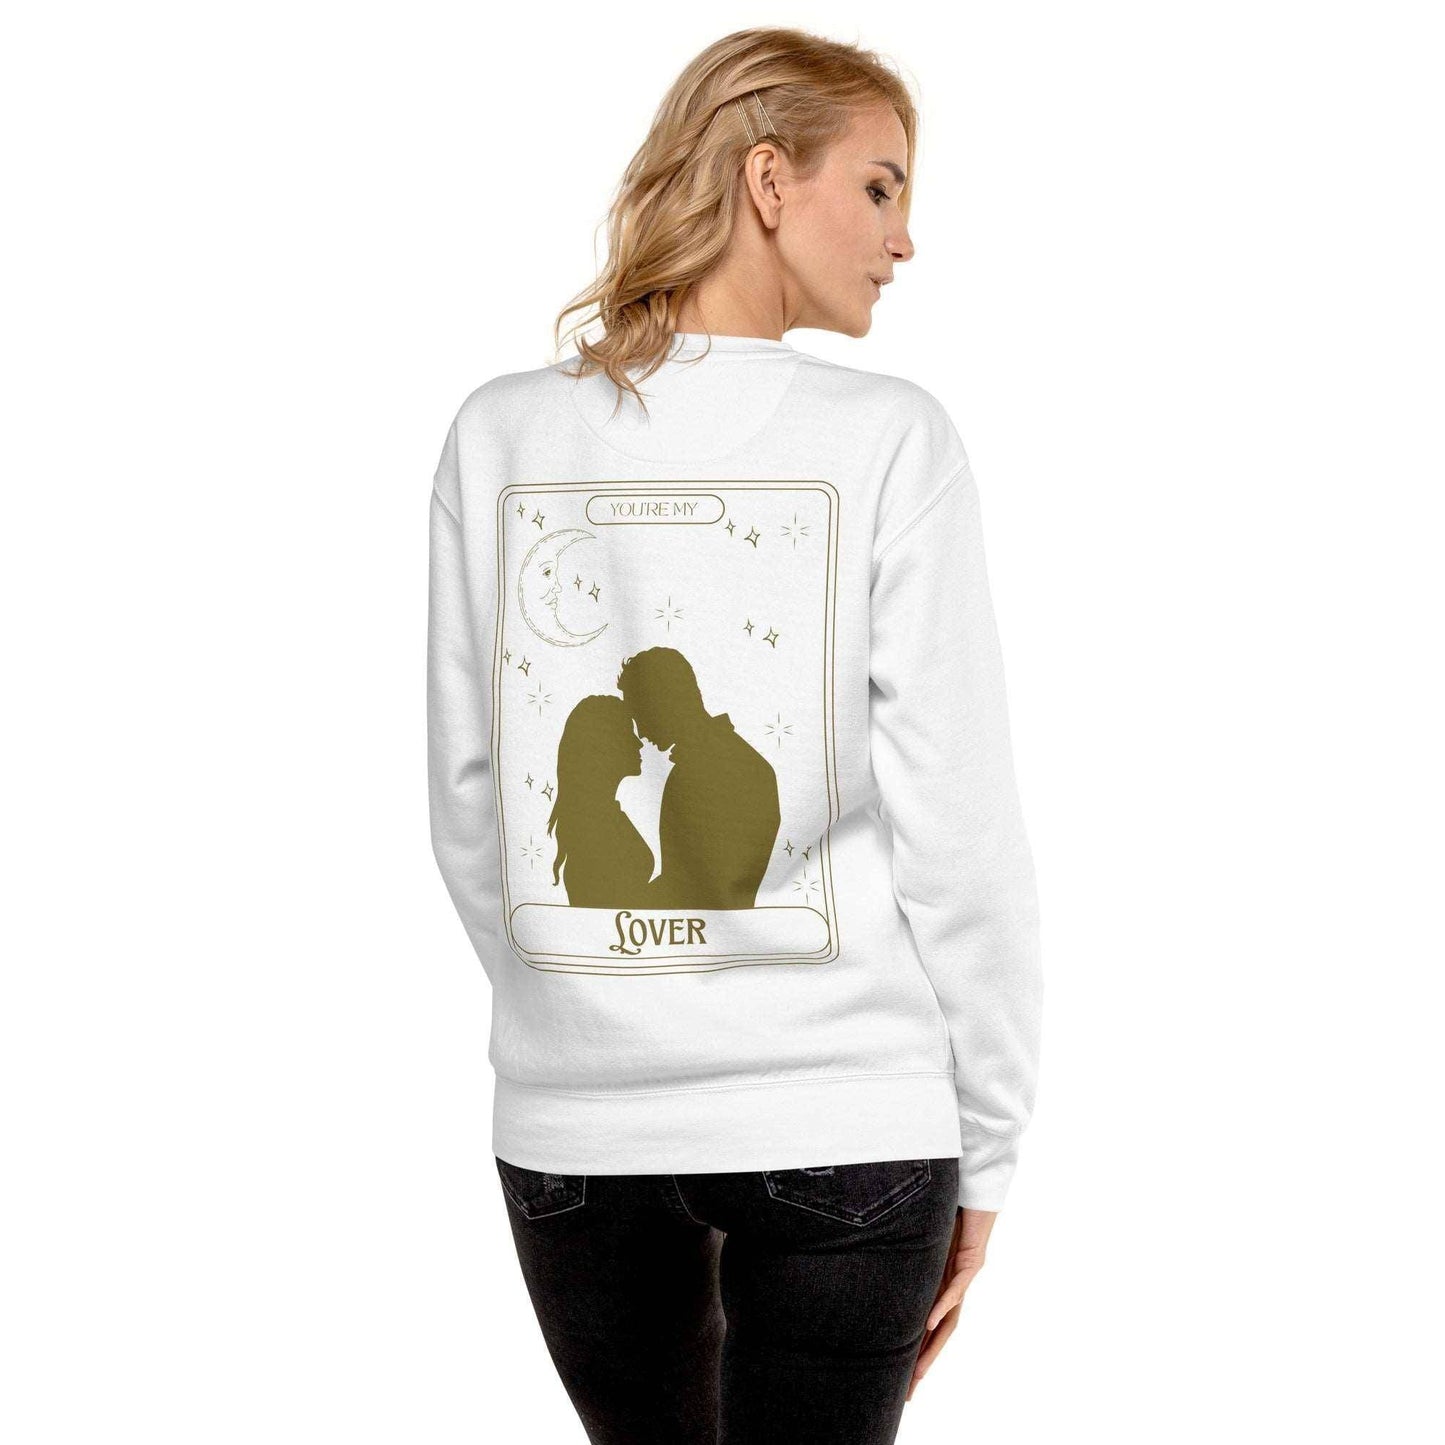 Taylor Swift Lover Embroidered Sweatshirt White